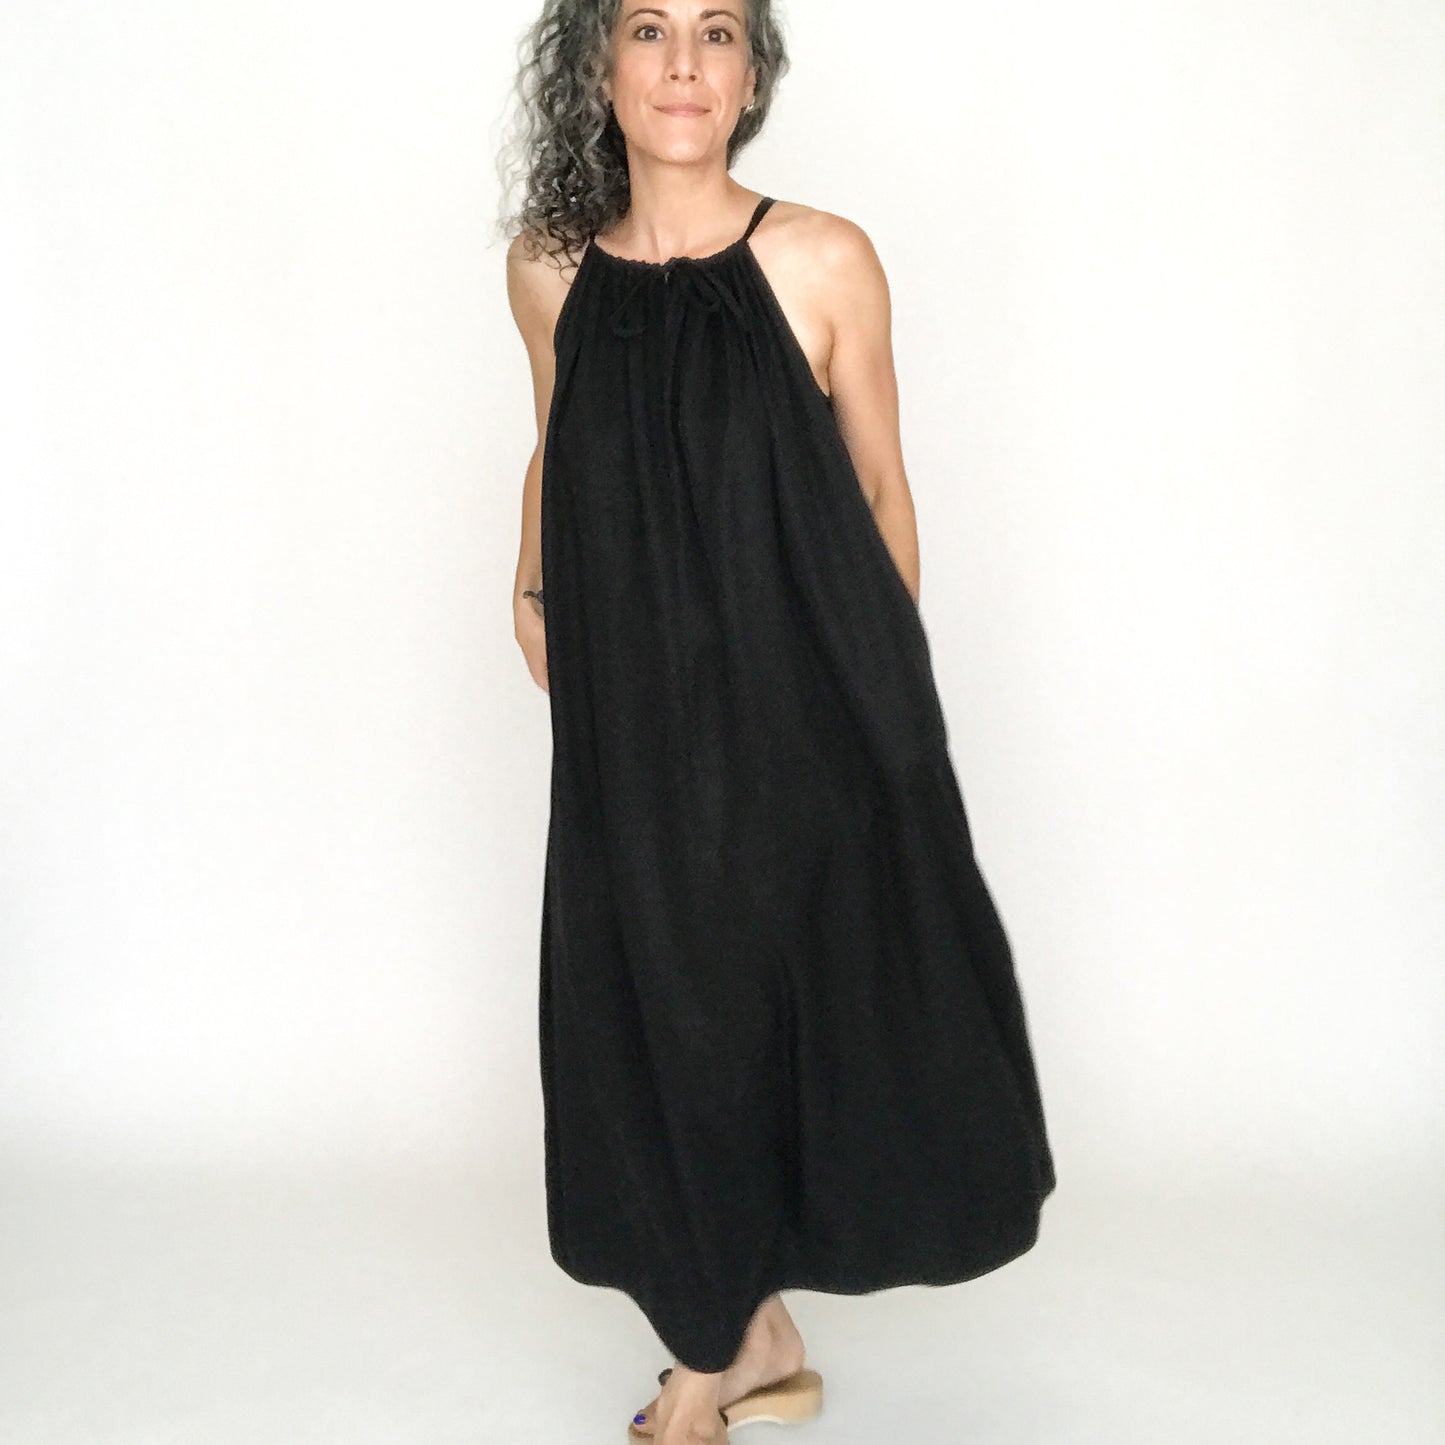 House of Lu Summer House Dress in Black Tencel in Size L/XL. Worn backwards with tie at front.  